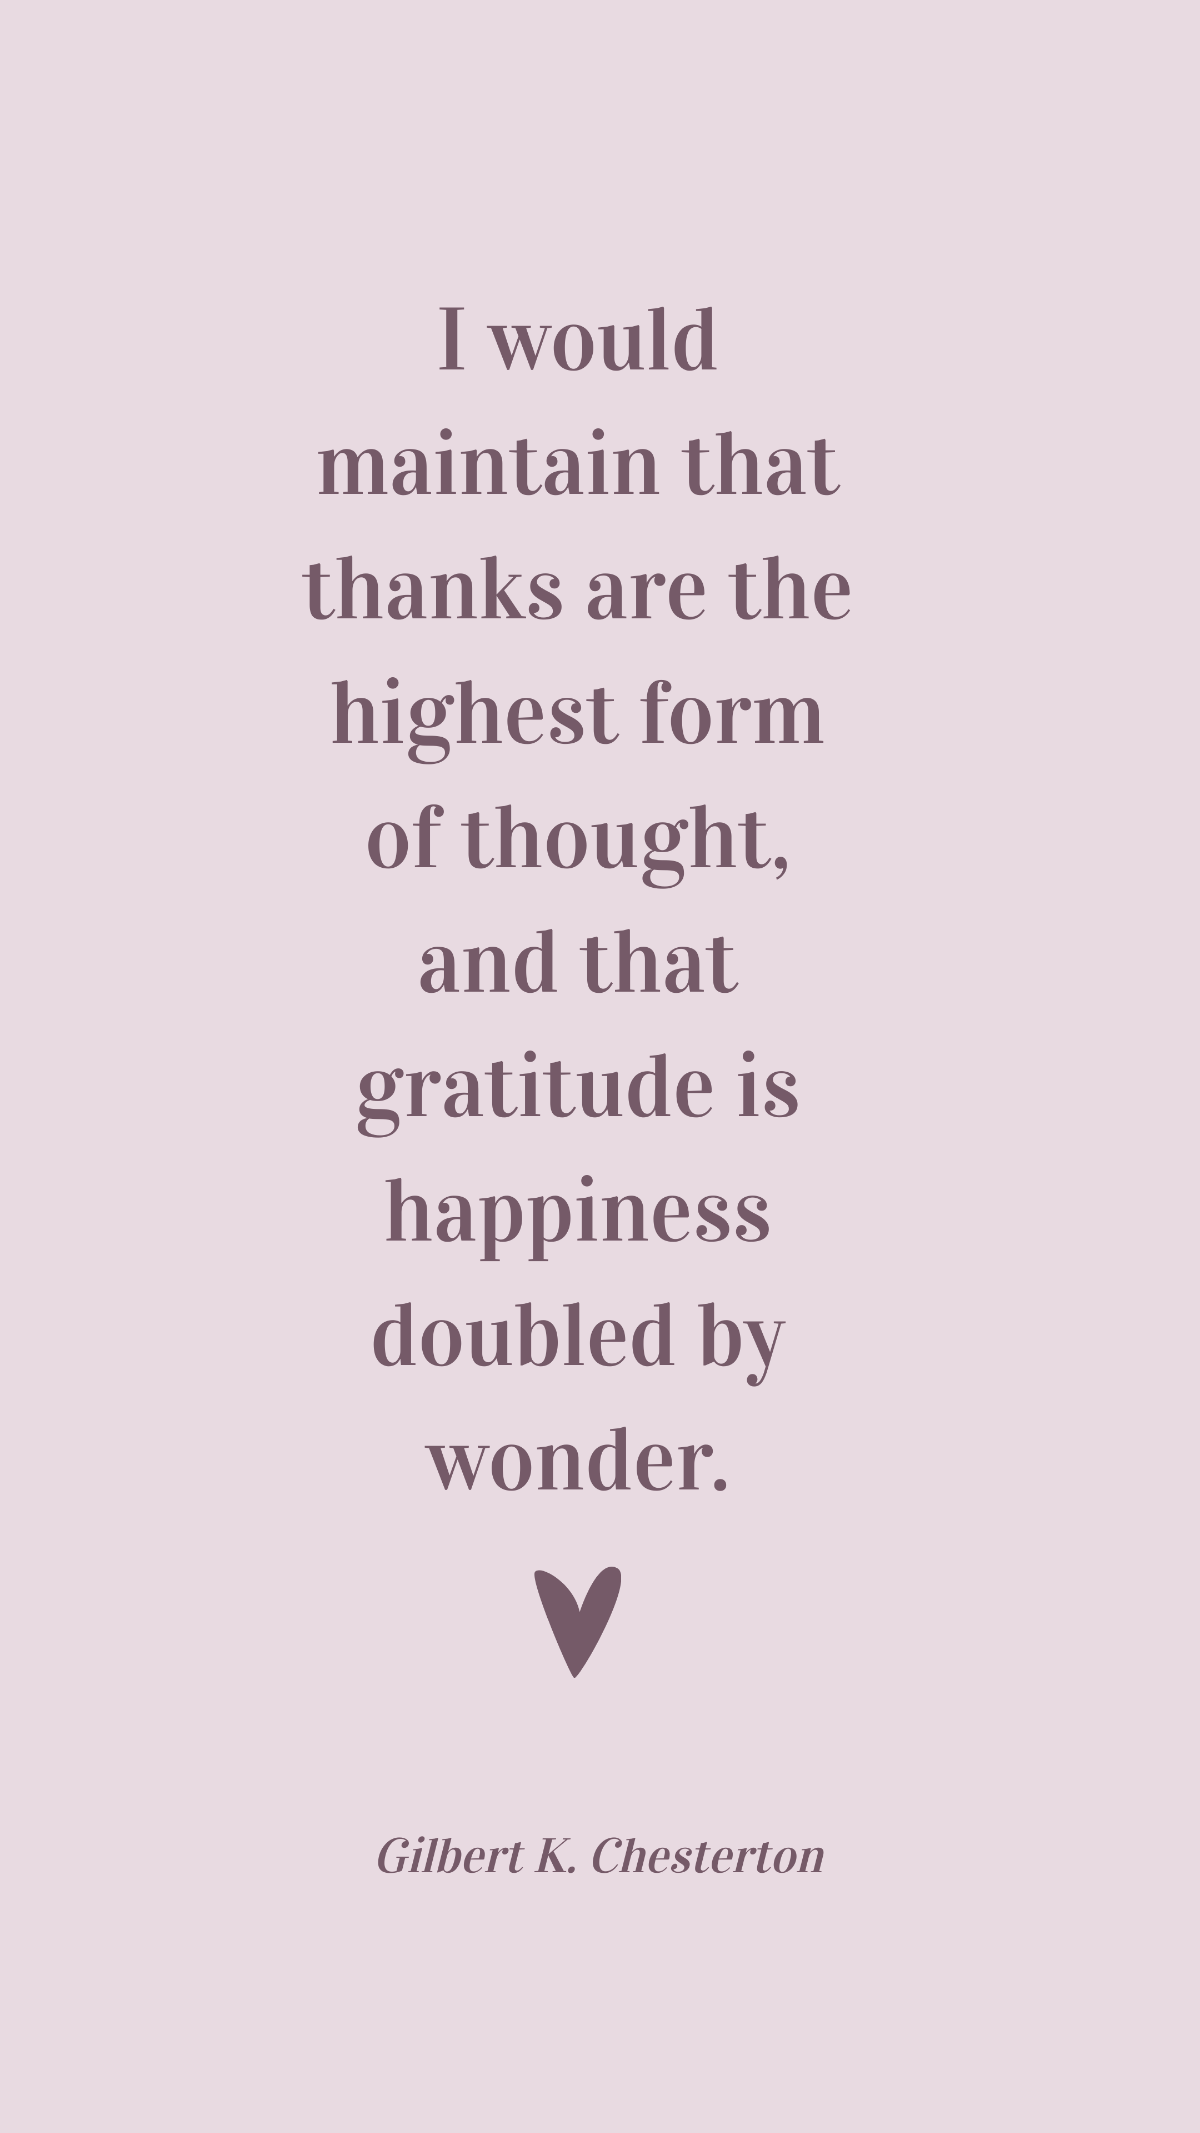 Free Gilbert K. Chesterton - I would maintain that thanks are the highest form of thought, and that gratitude is happiness doubled by wonder. Template